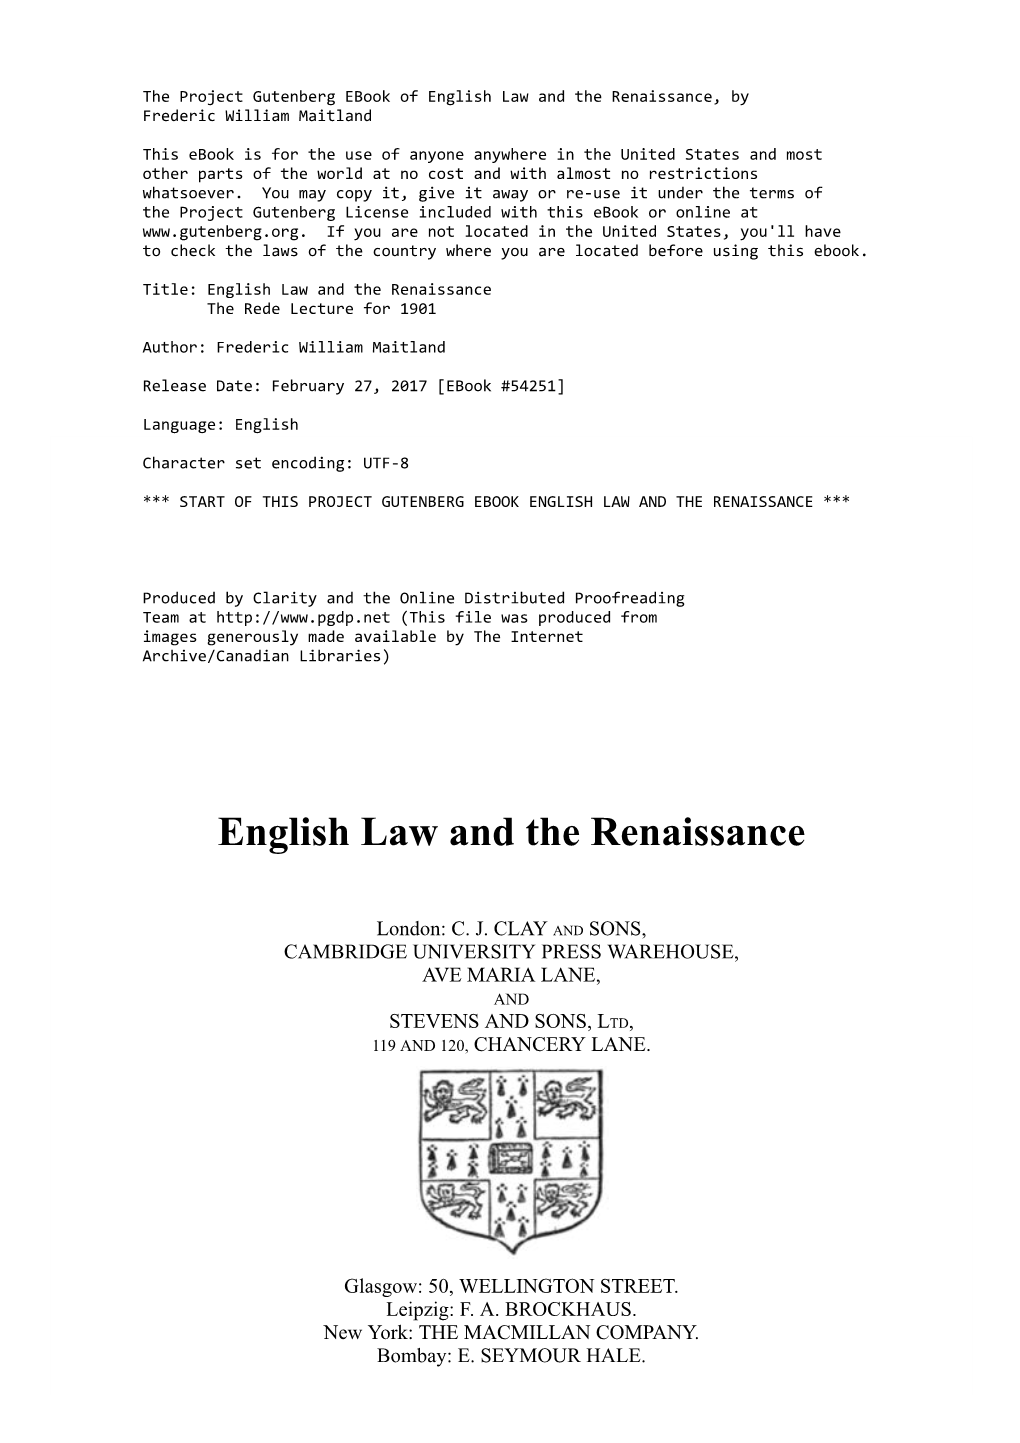 English Law and the Renaissance, by Frederic William Maitland